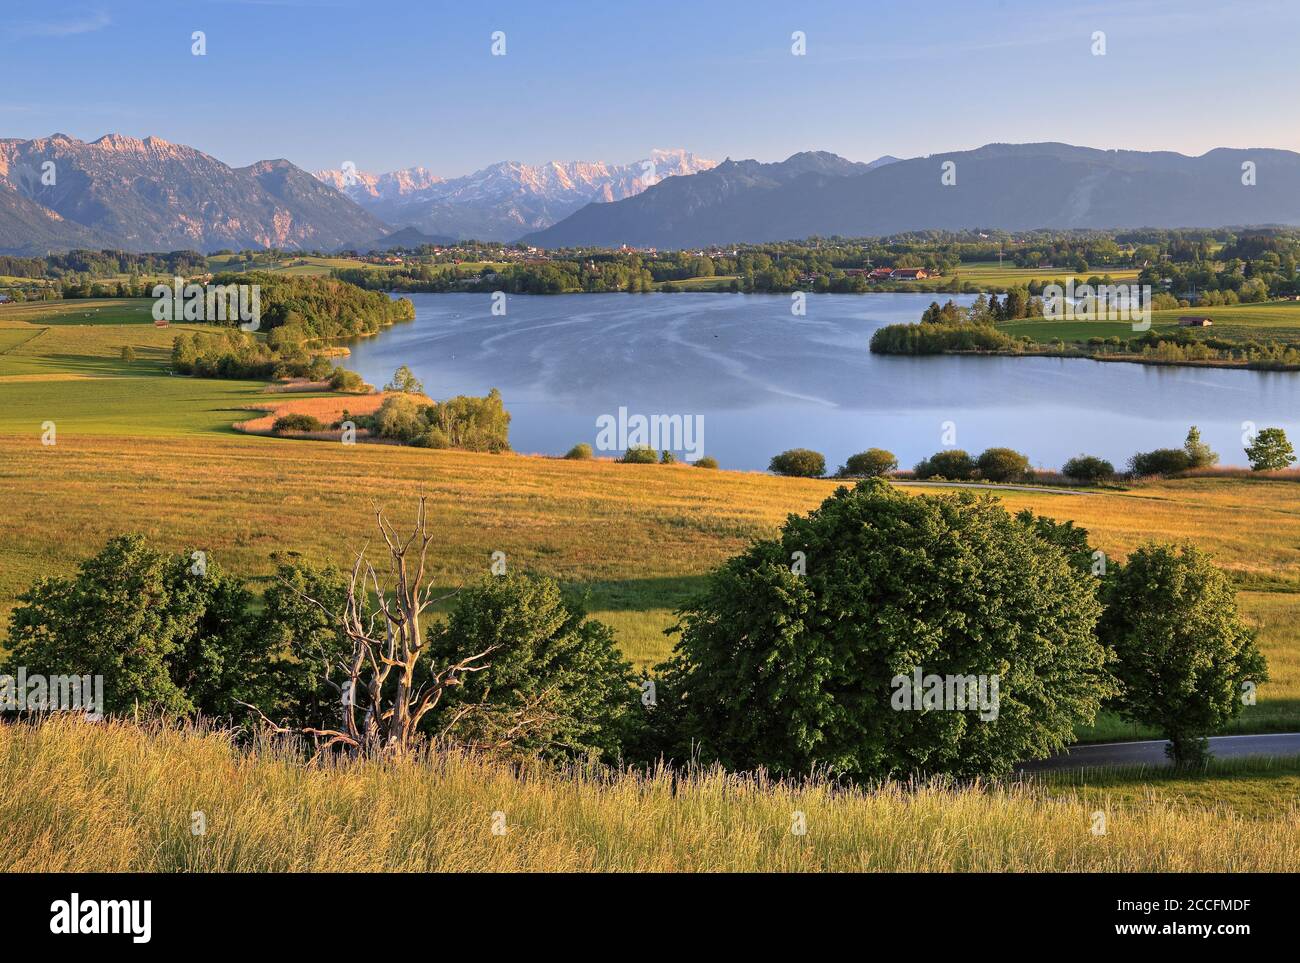 Panorama with Riegsee, Zugspitzgruppe (2962m) in the Wetterstein Mountains and Ammergau Alps, Aidling, Das Blaue Land, Upper Bavaria, Bavaria, Germany Stock Photo